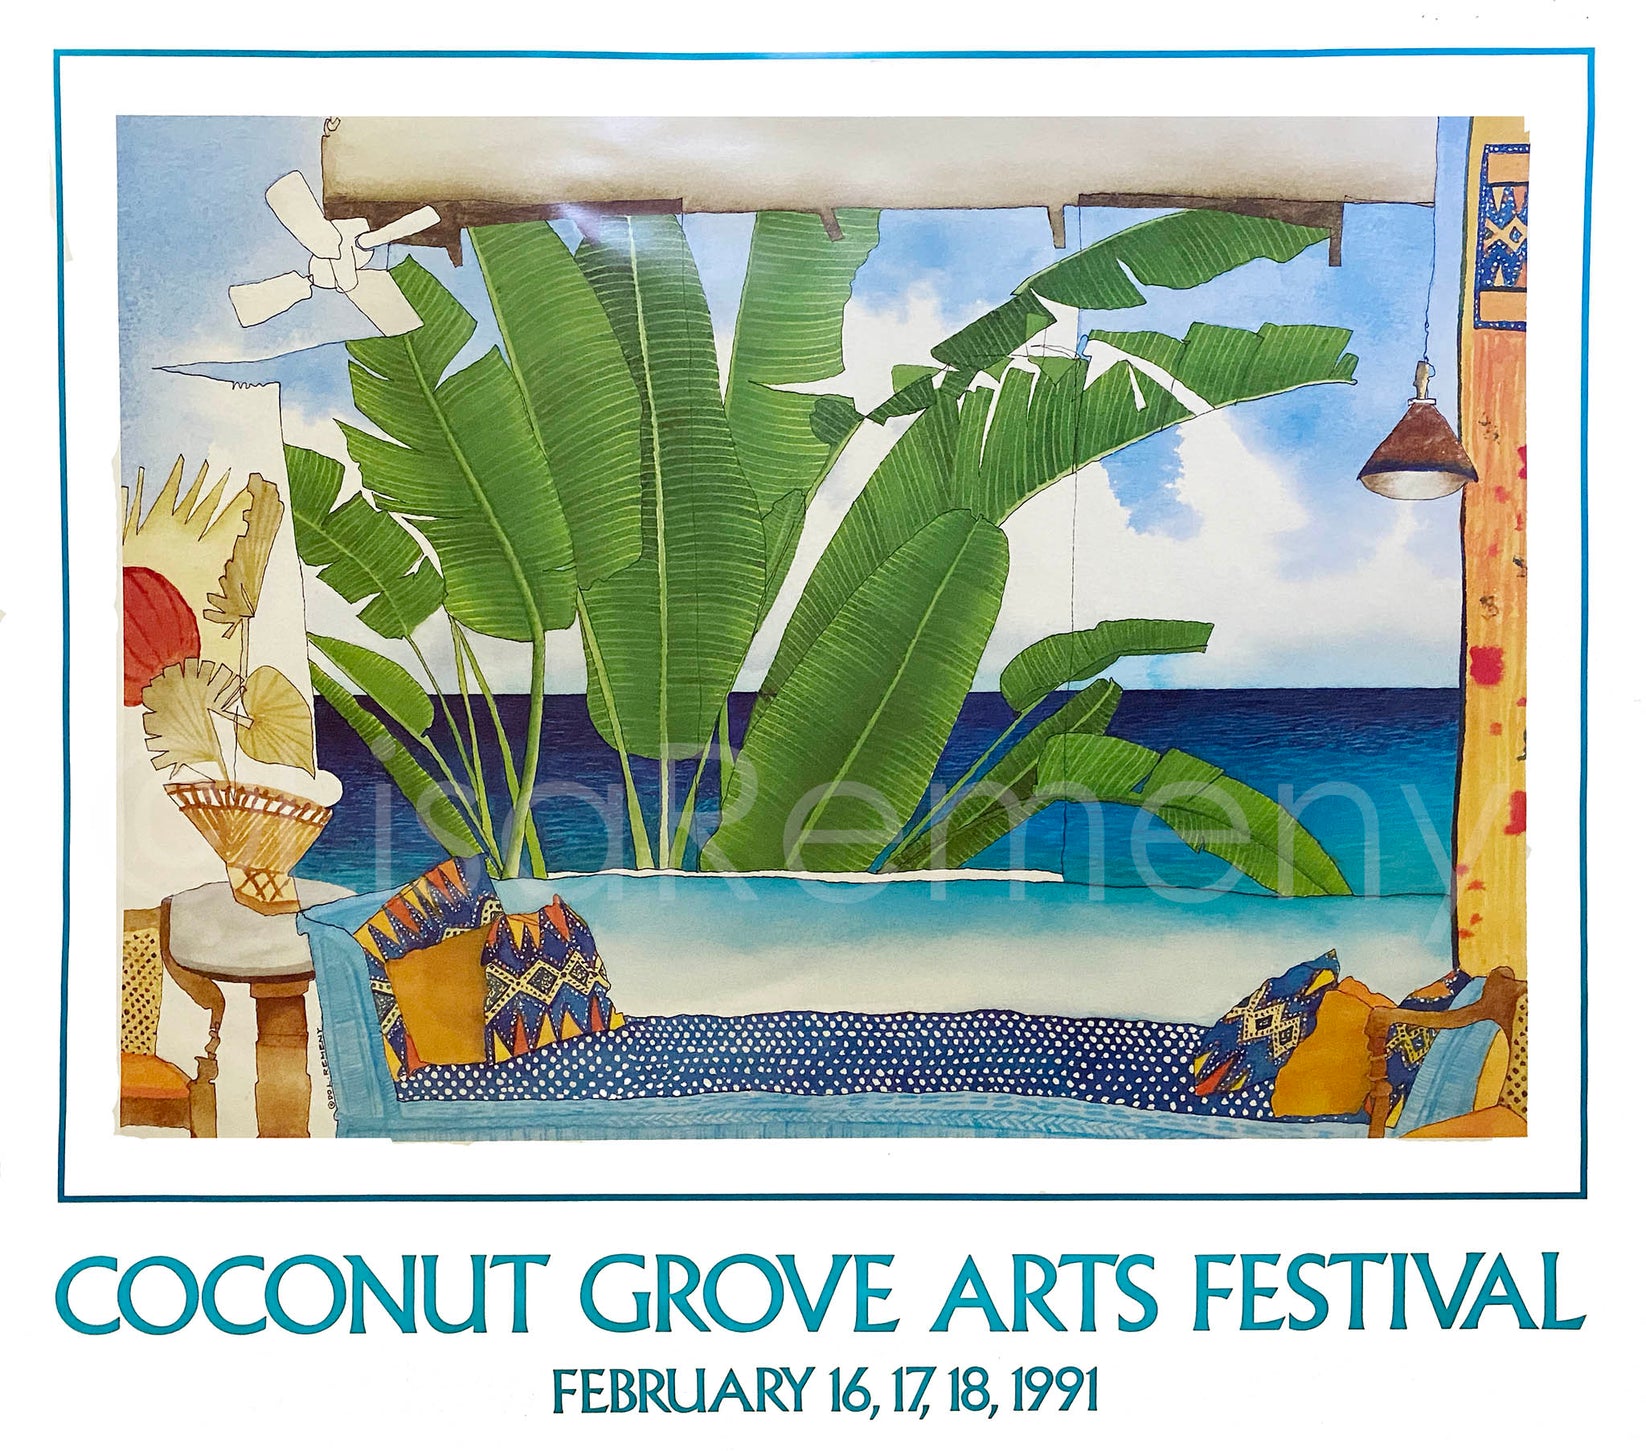 Poster 1991 Coconut Grove Arts Festival theremenycollection